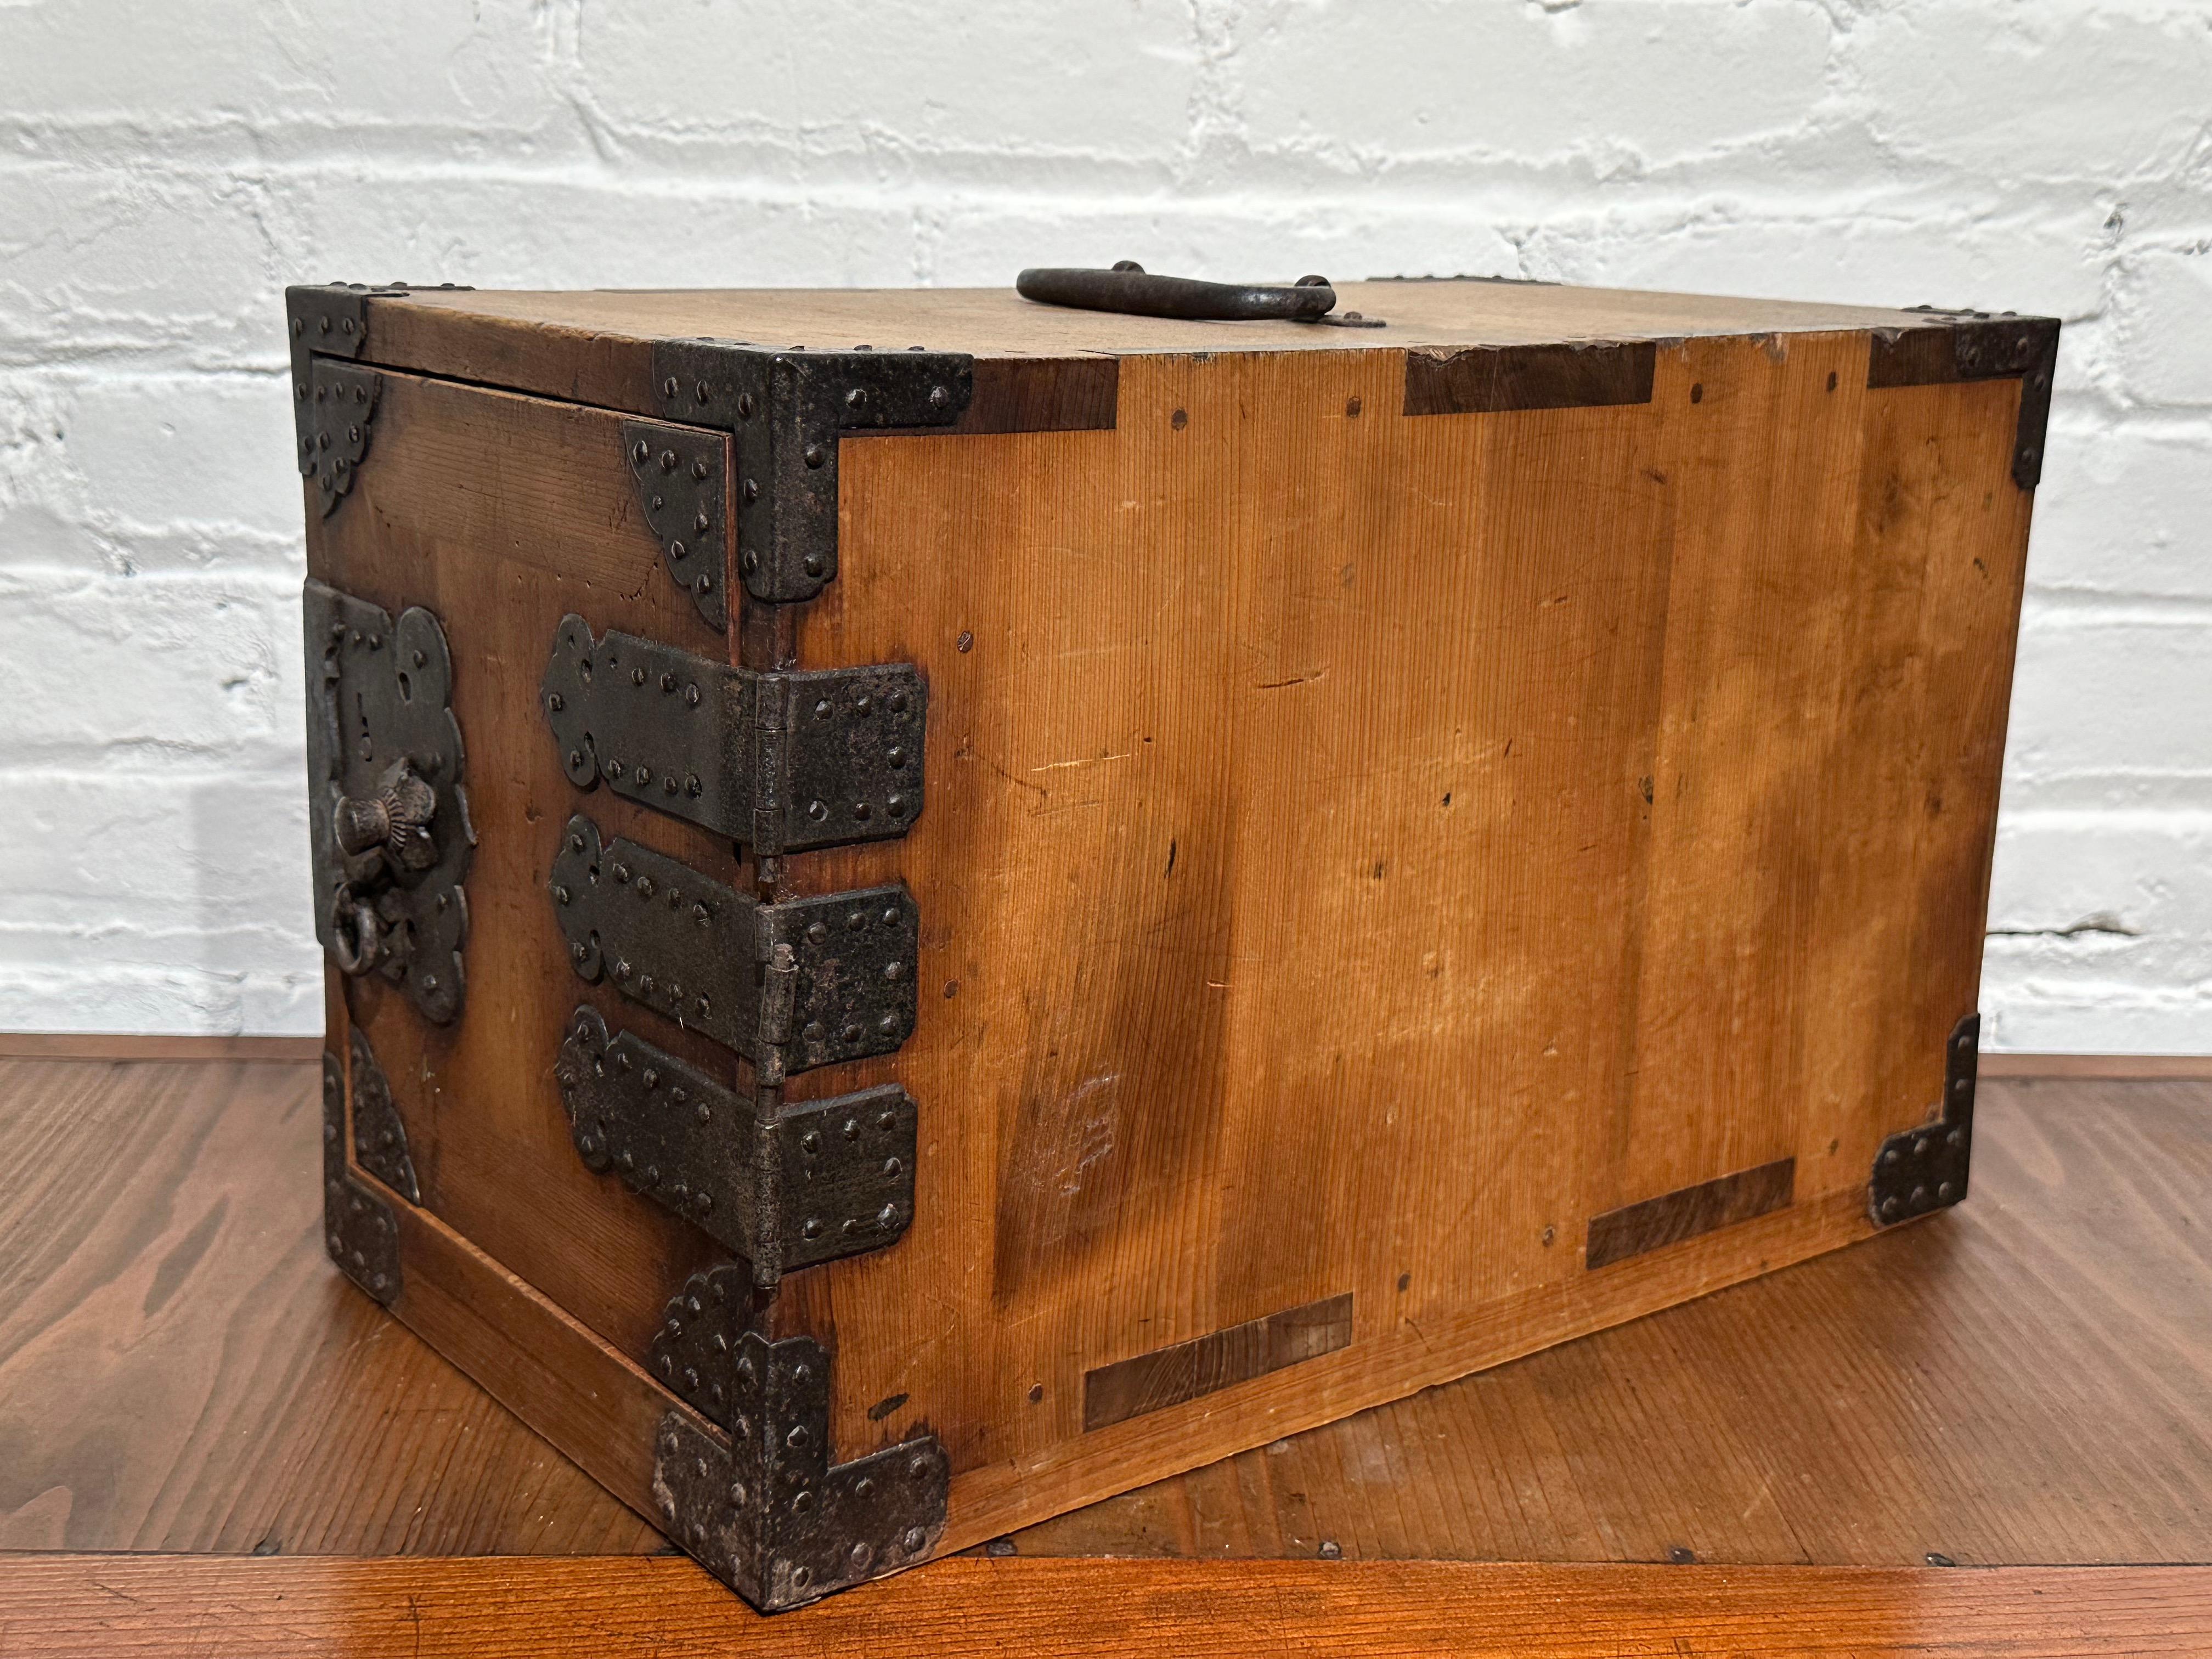 Available from Shogun's Gallery in Portland, Oregon for over 40 years specializing in Asian Arts & Antiques.

Known as a kakesuzuri (portable document chest) or a funadansu (ship's chest) from the late Edo era (c 1860). This tansu chest has three 